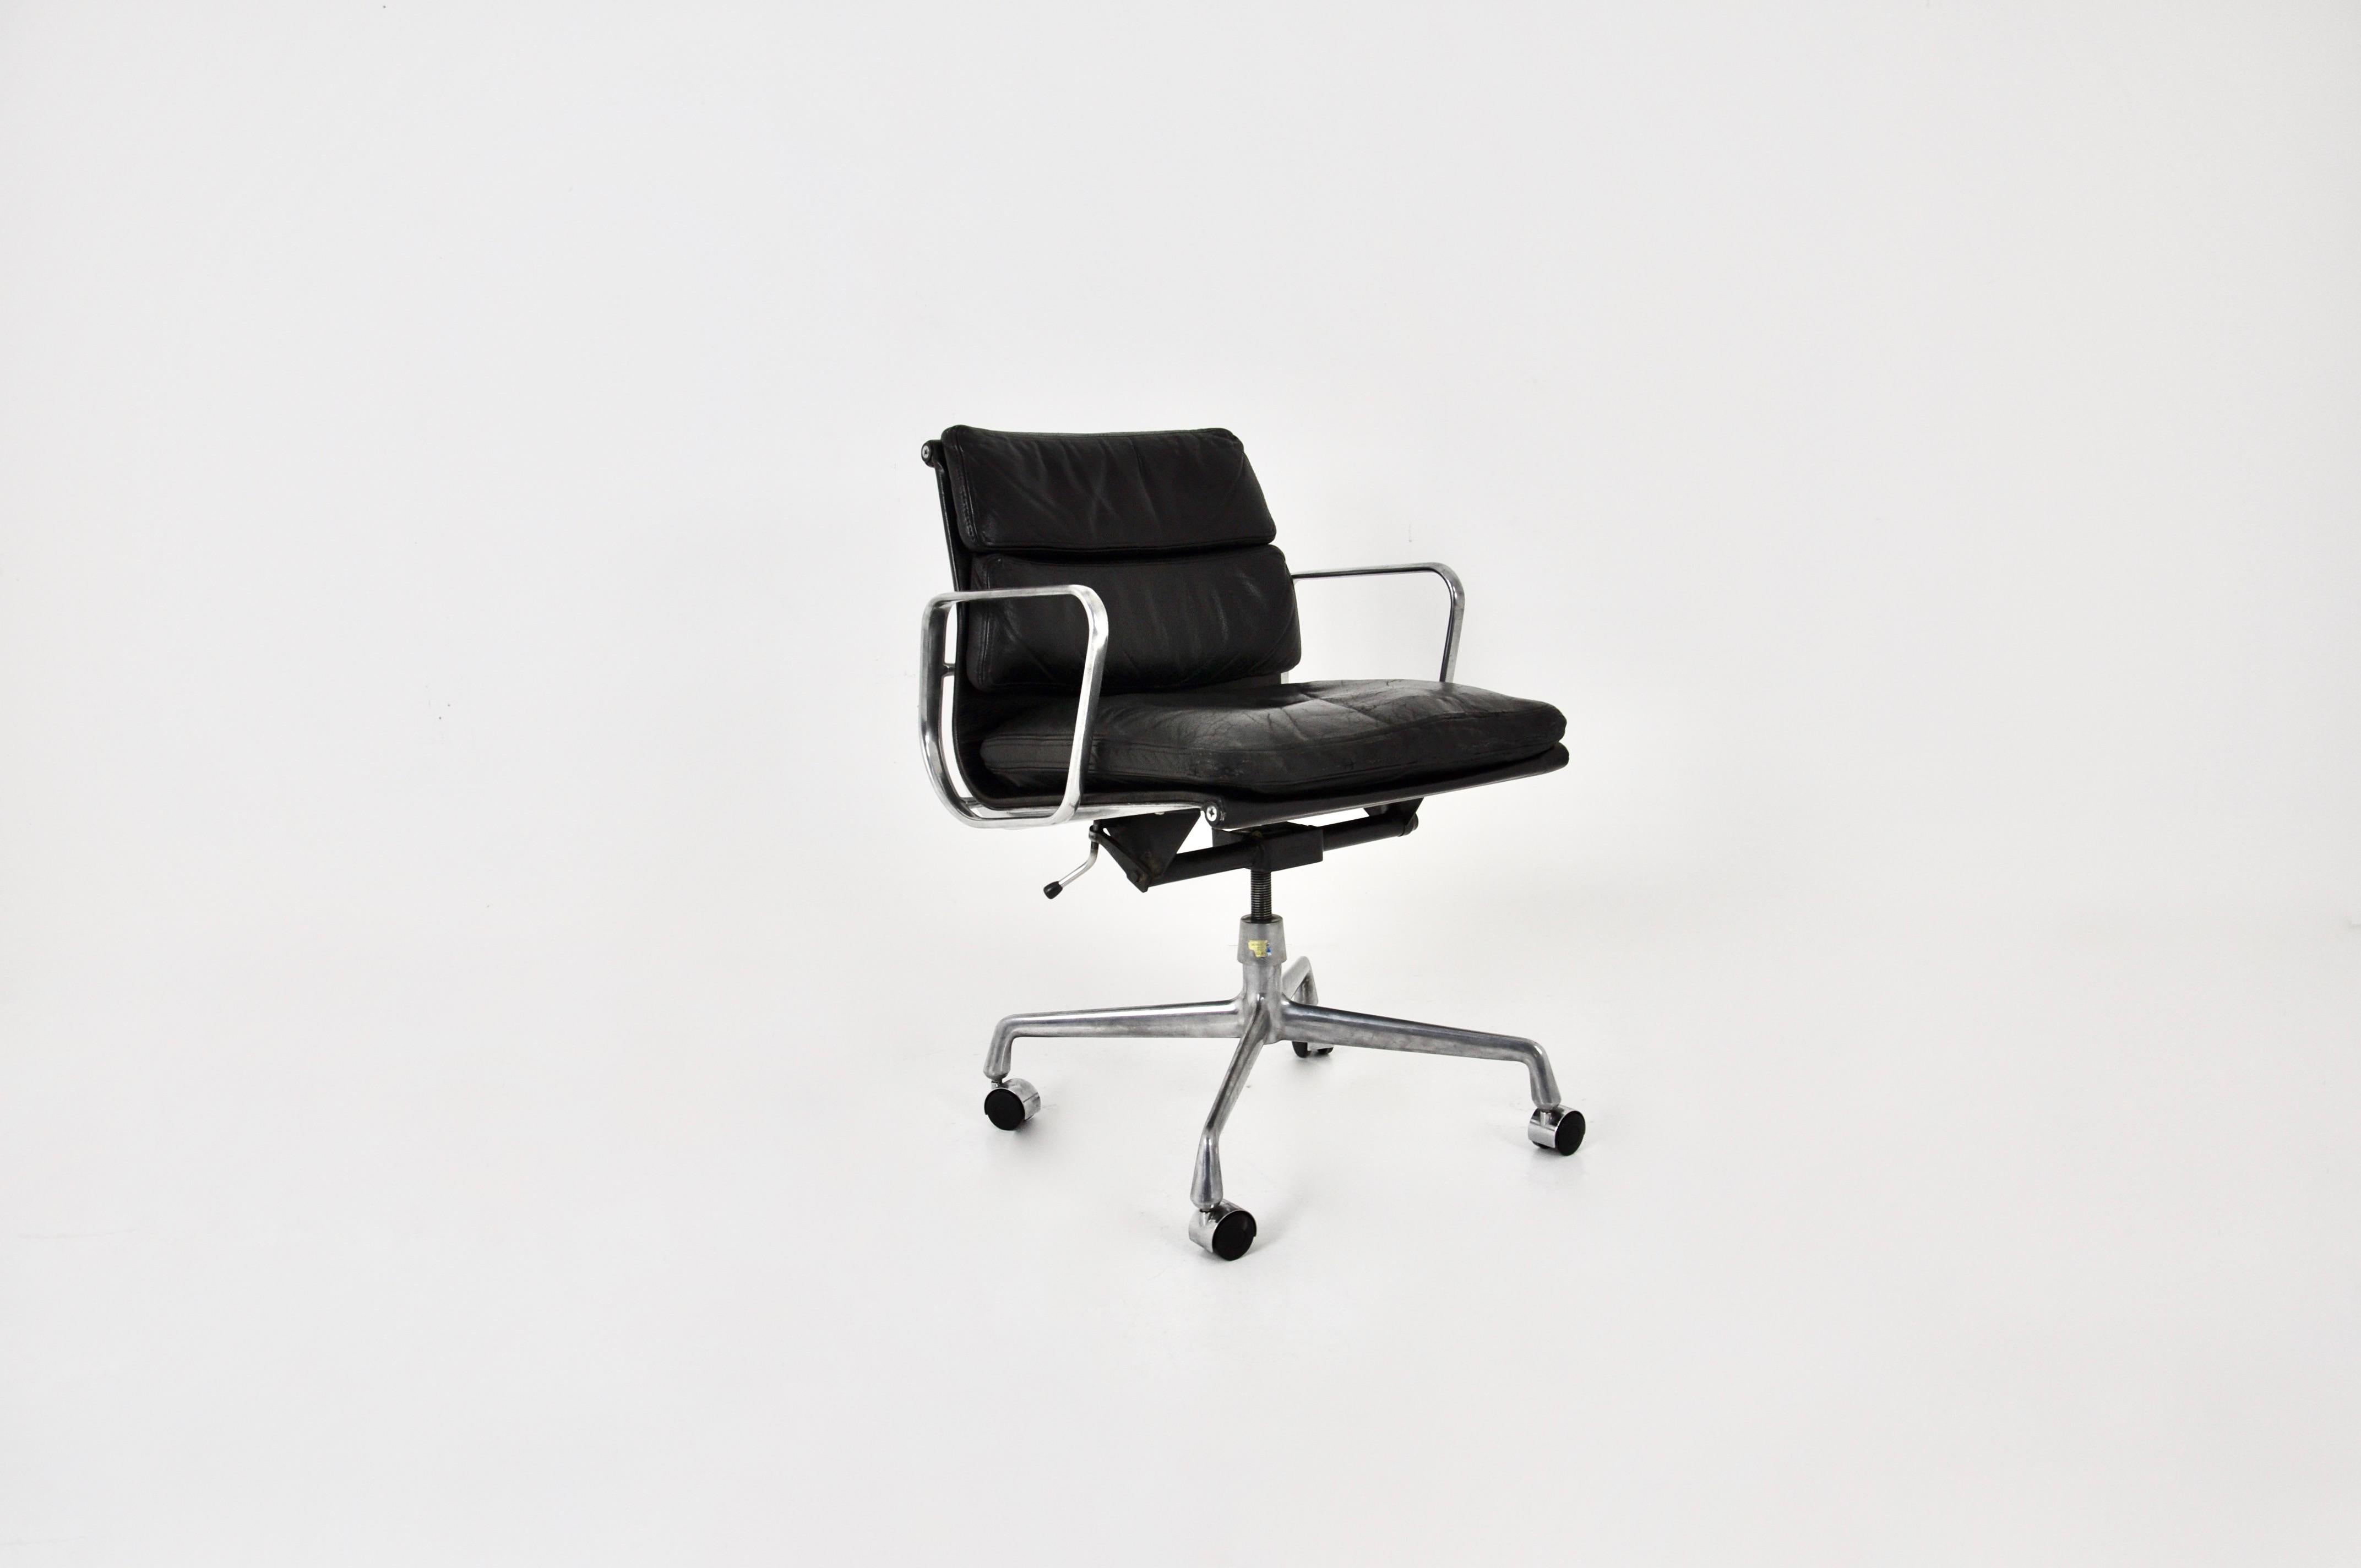 Black leather armchair with aluminium base and wheels. Turns on itself. Dimensions: Seat height 53cm. Stamped Ring Mobelfabrikk Norway. Wear due to time and age of the chair.